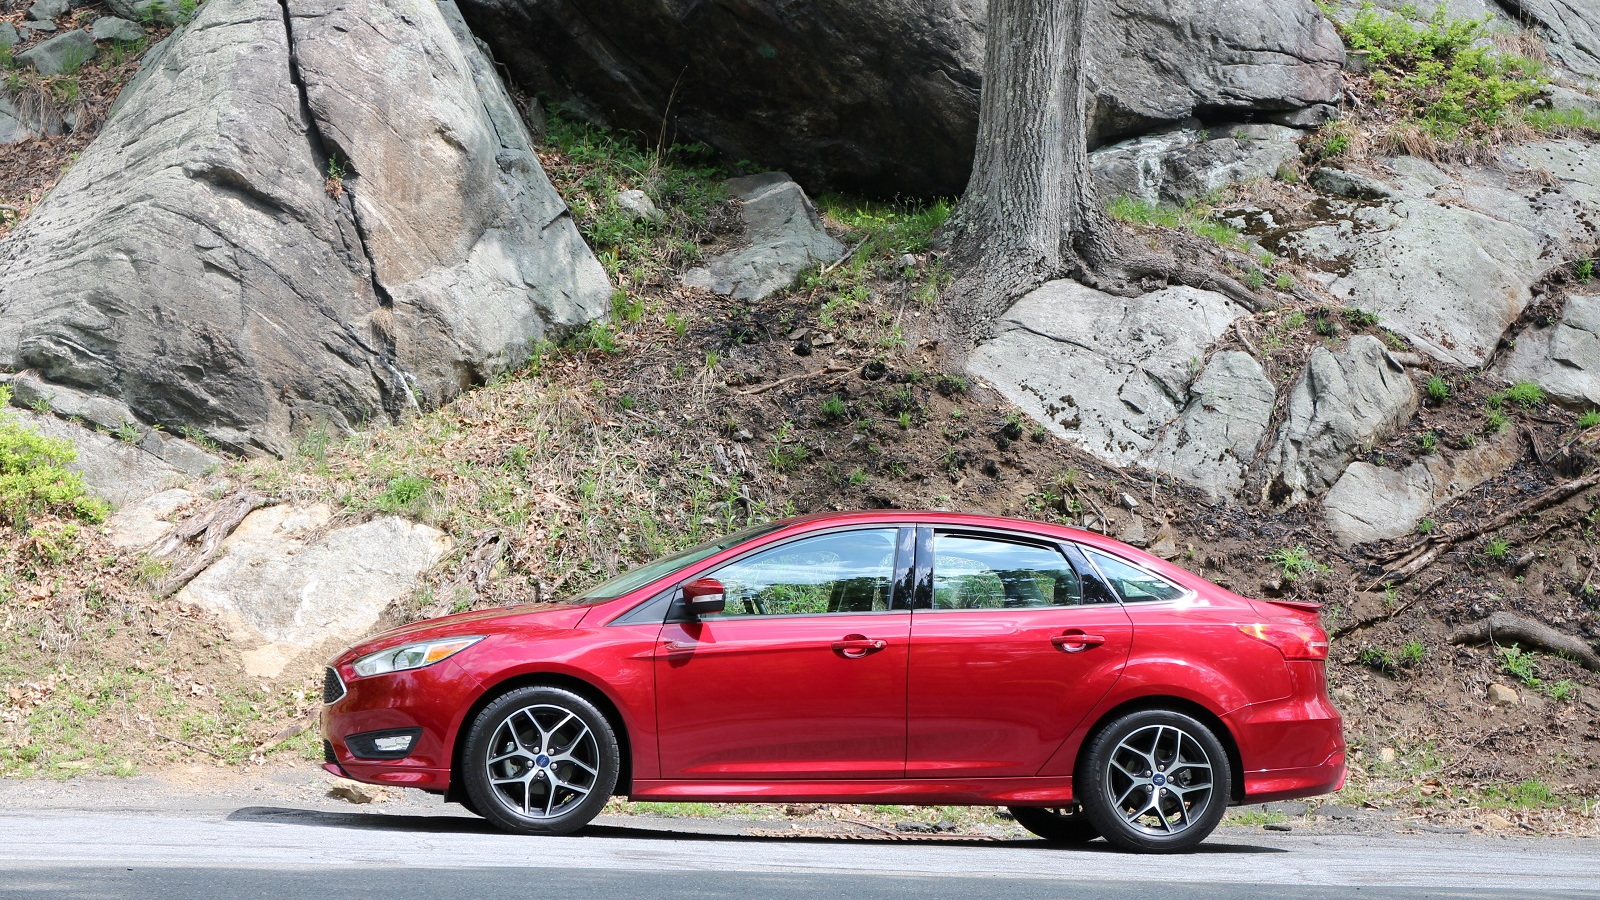 2015 Ford Focus SE EcoBoost, Bear Mountain State Park, NY, May 2015